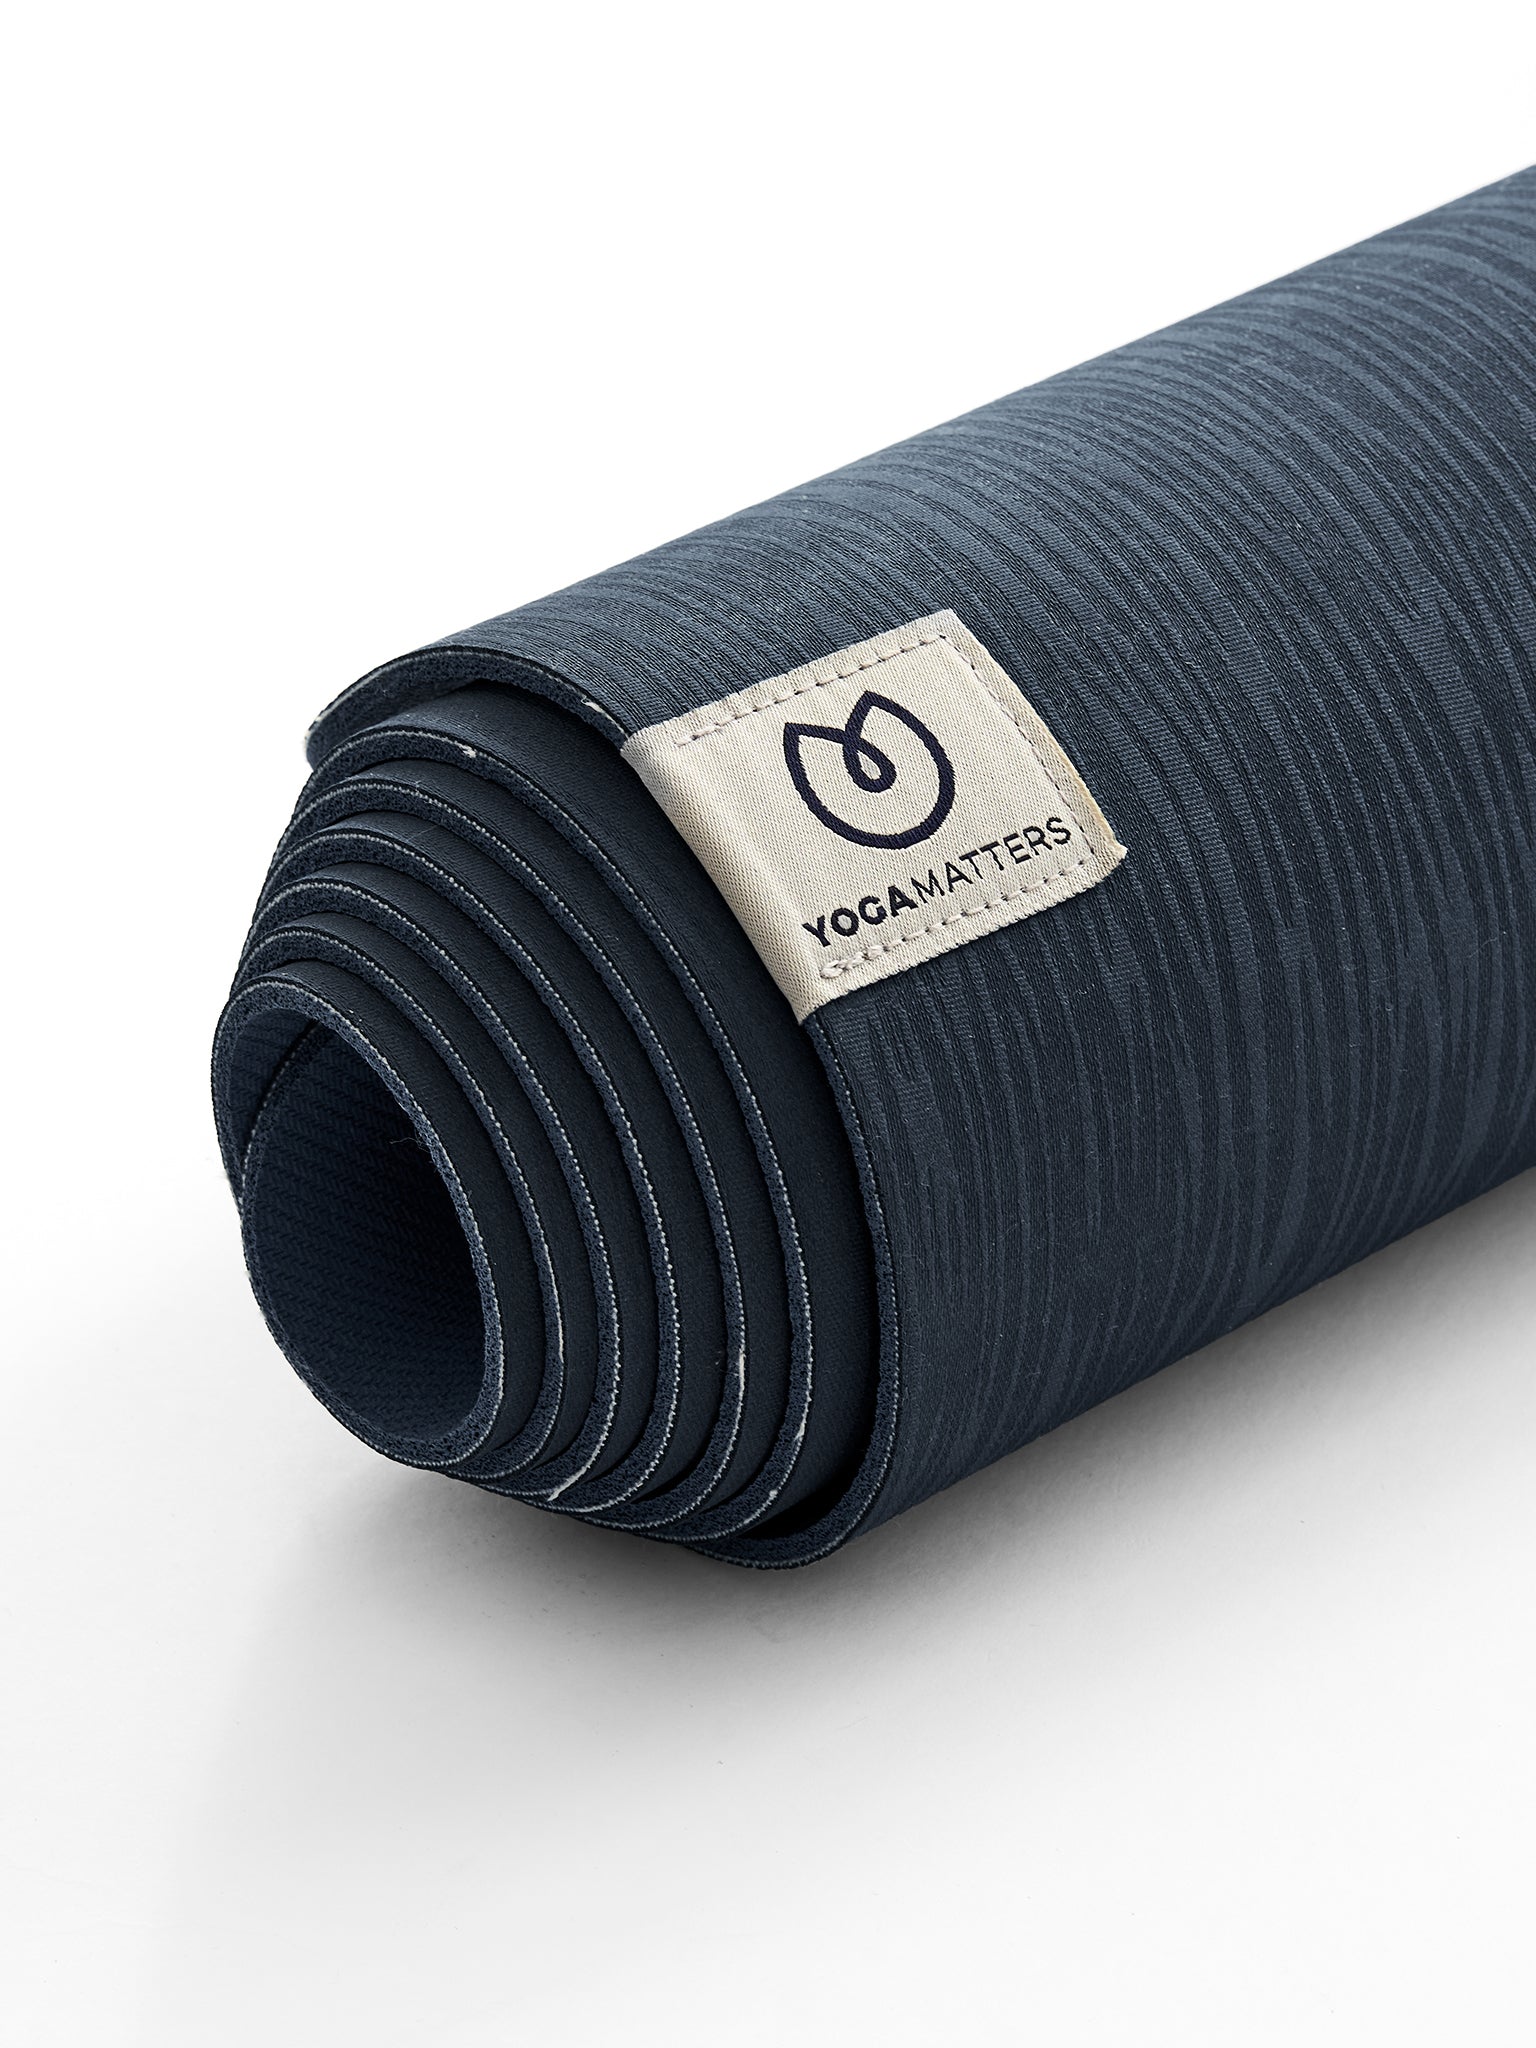 Yogamatters navy blue yoga mat rolled up front view with textured surface and brand label visible on white background.